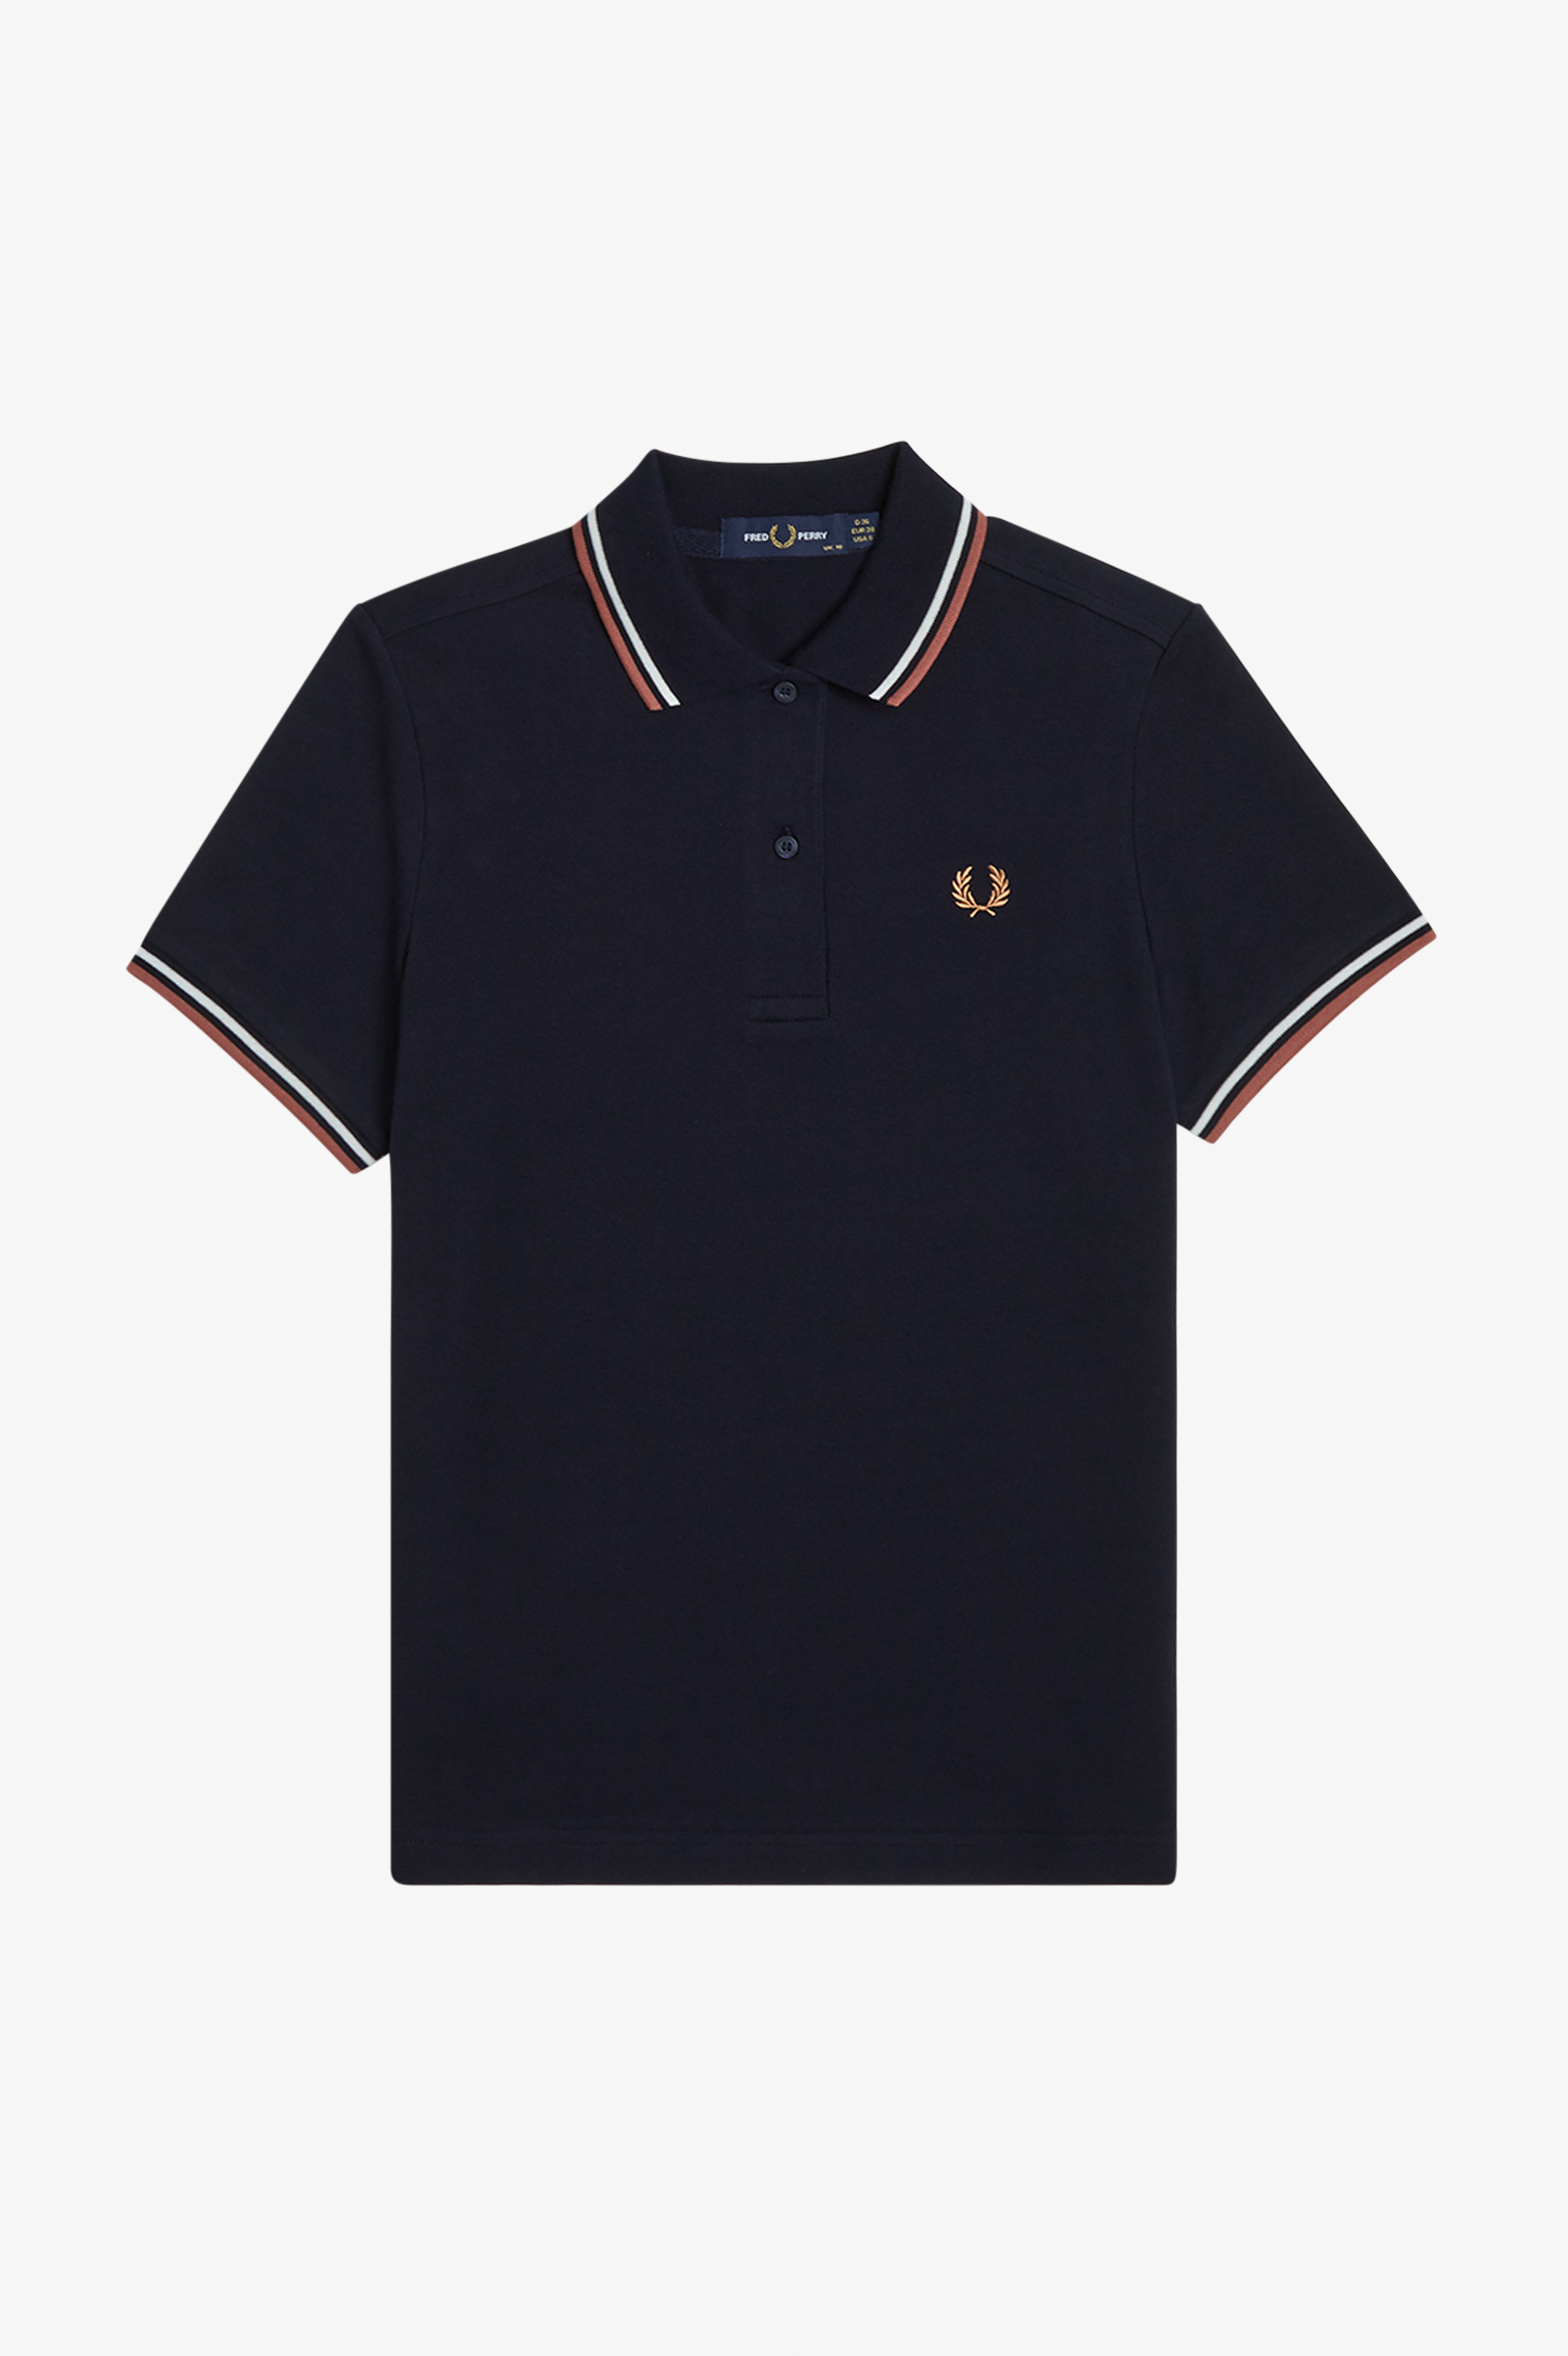 Fred Perry - W' TWIN TIPPED POLO SHIRT - Navy/White/Lilac